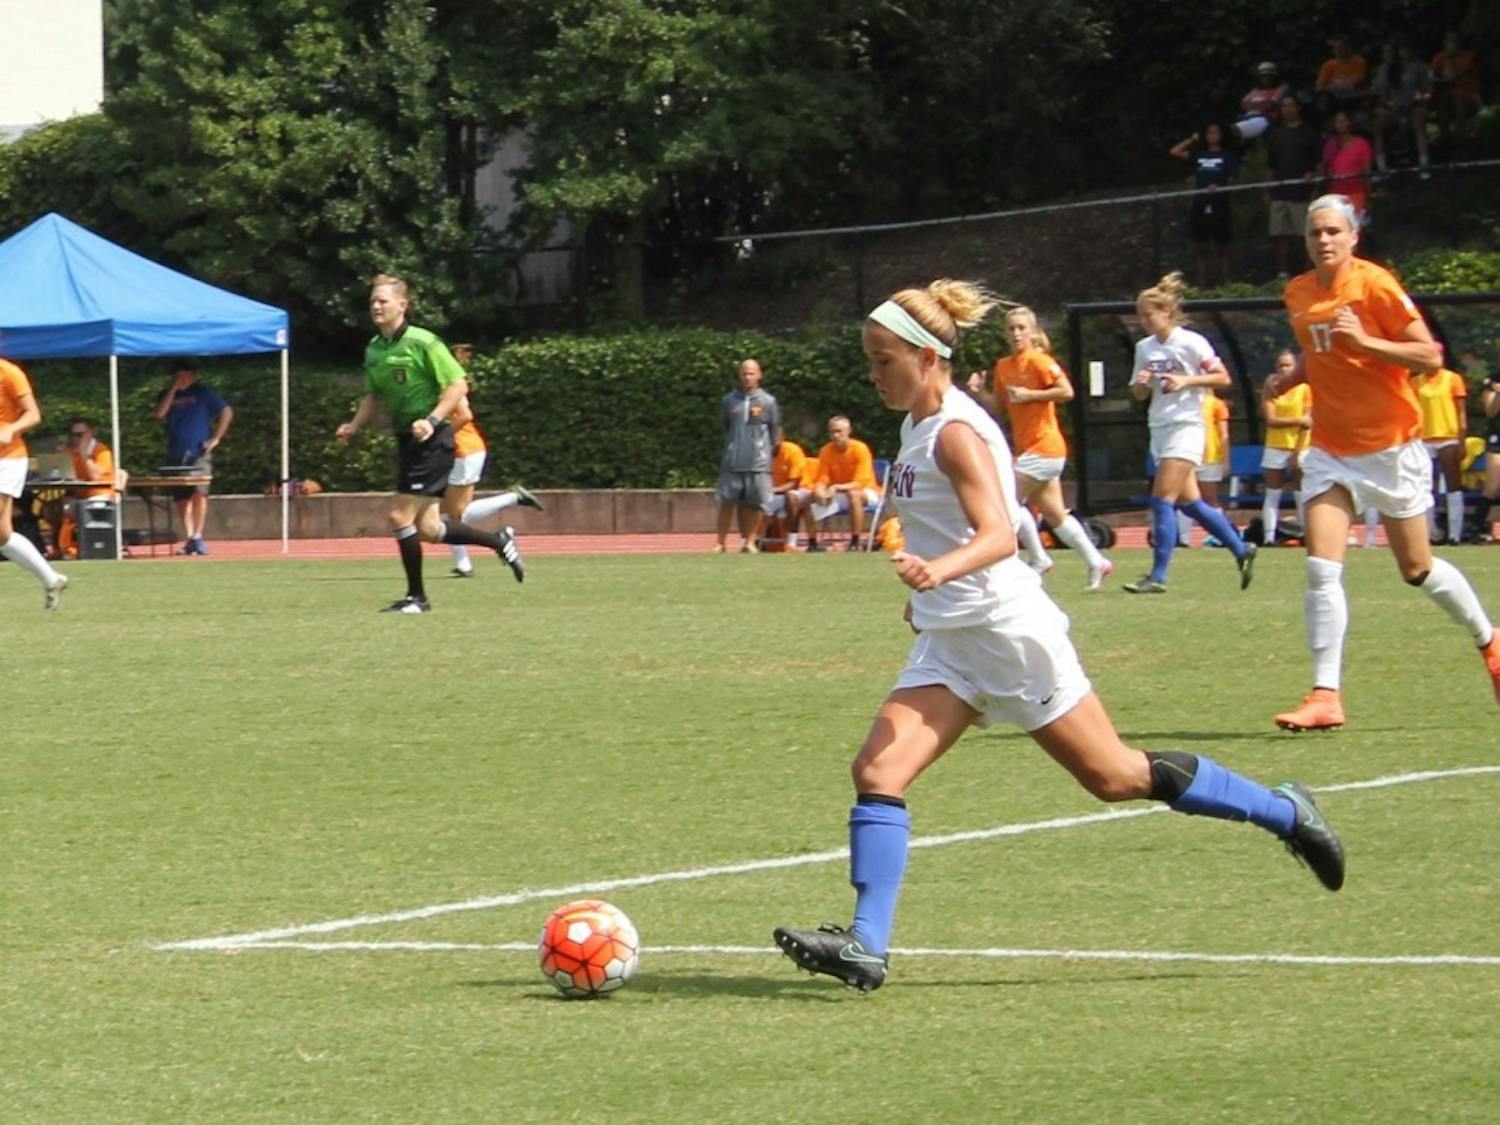 AU suffered its seventh straight defeat to begin the season at the hands of&nbsp;Tennessee on District Day September 4. The Eagles&nbsp;rallied days later to record their first victory against Longwood 1-0 September 8.&nbsp;